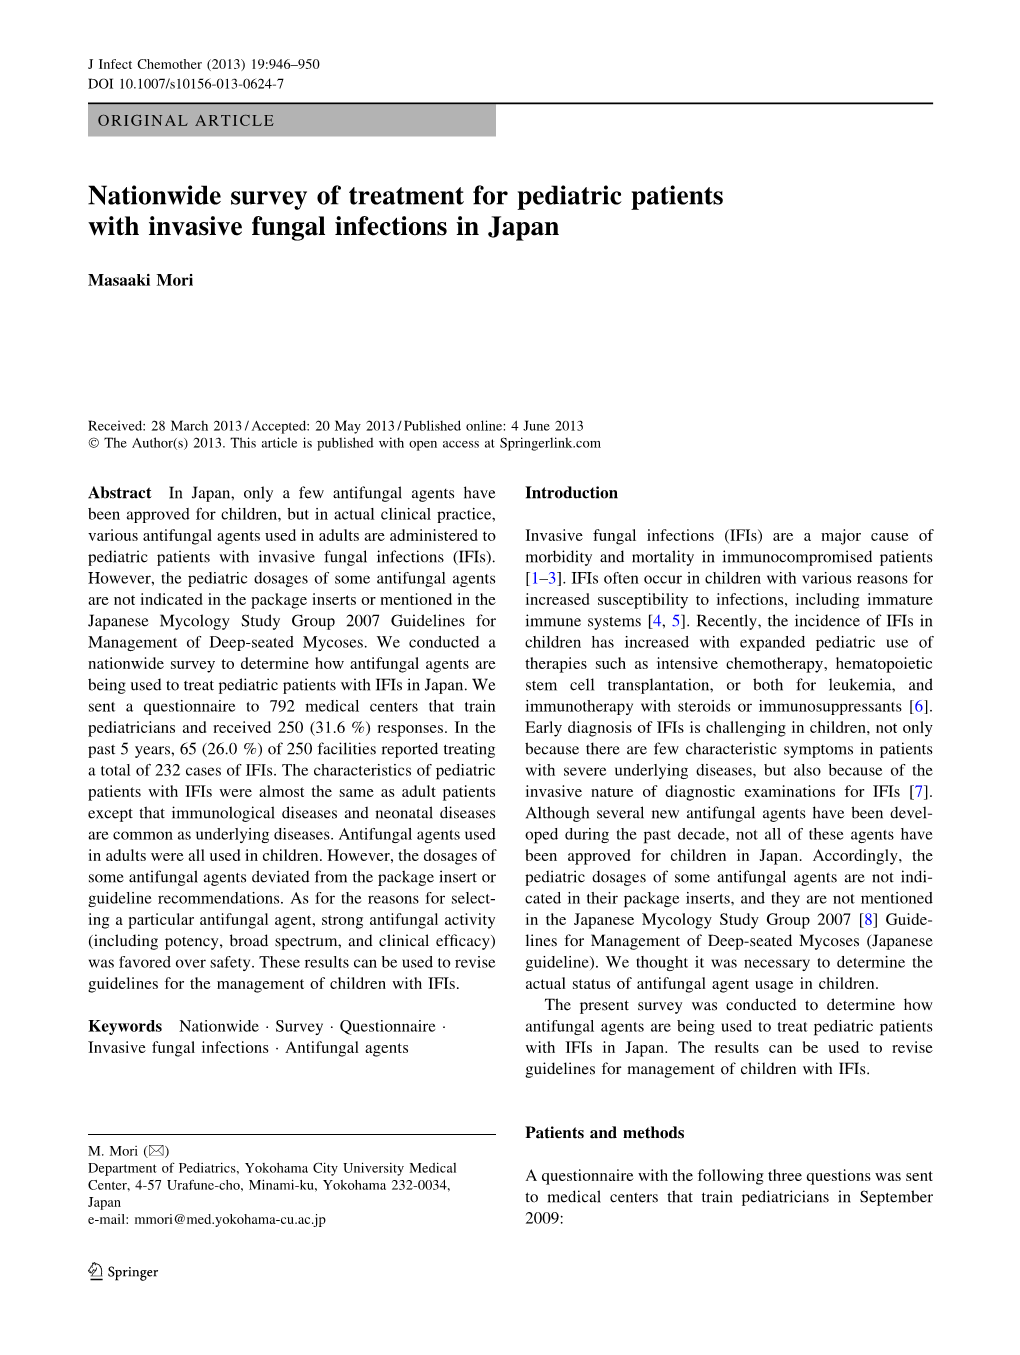 Nationwide Survey of Treatment for Pediatric Patients with Invasive Fungal Infections in Japan